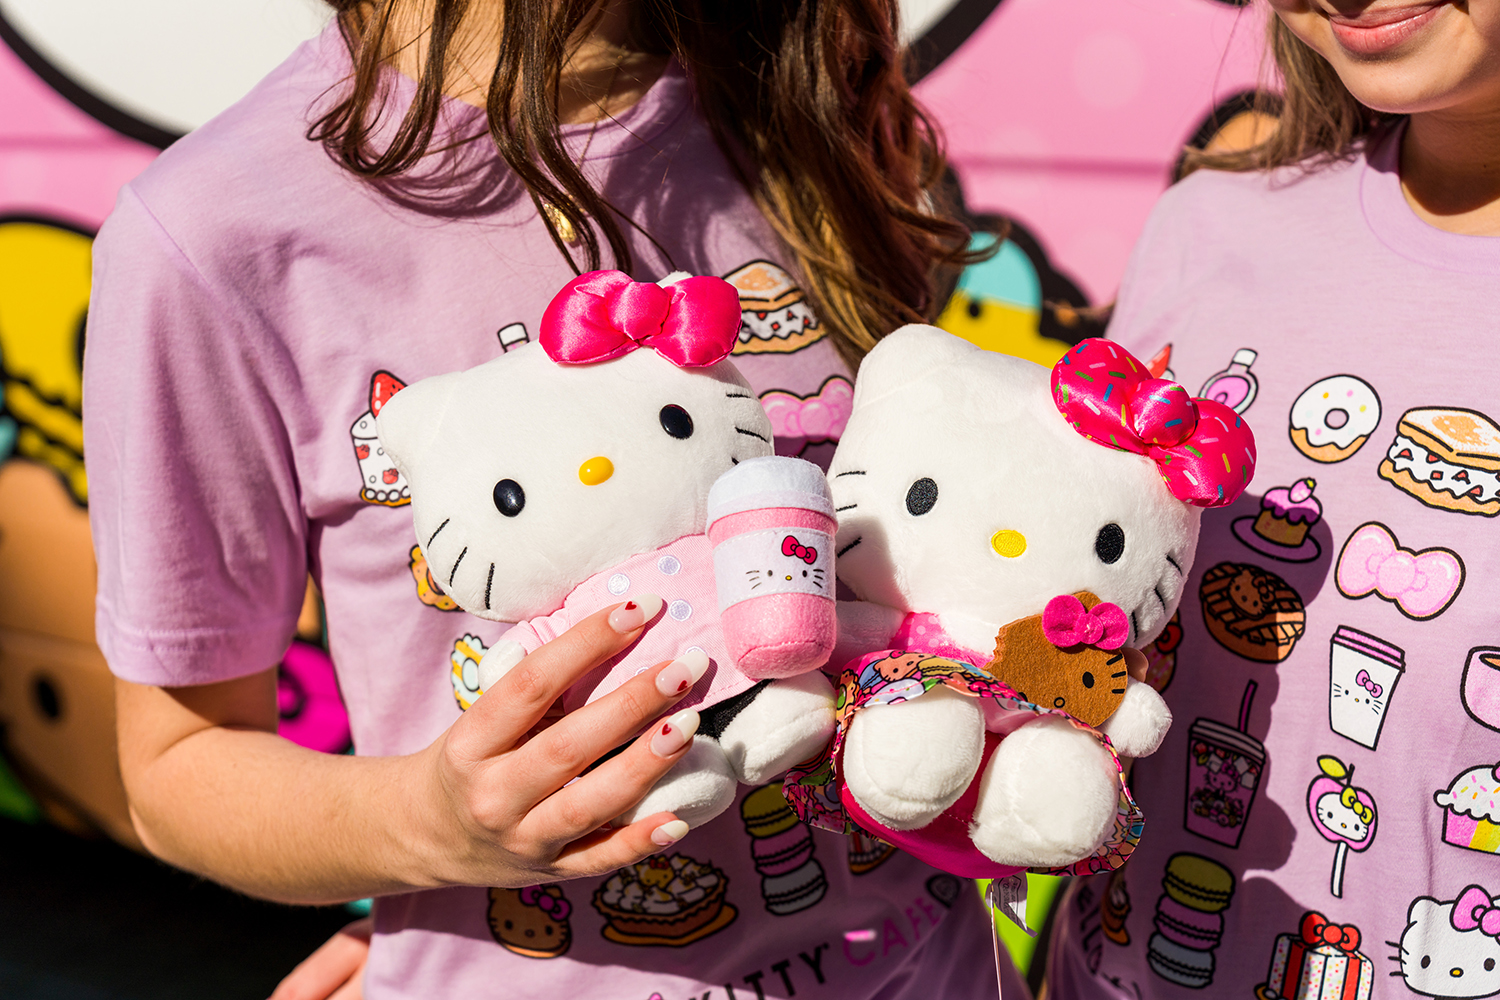 How three entrepreneurs opened America's first Hello Kitty Cafe